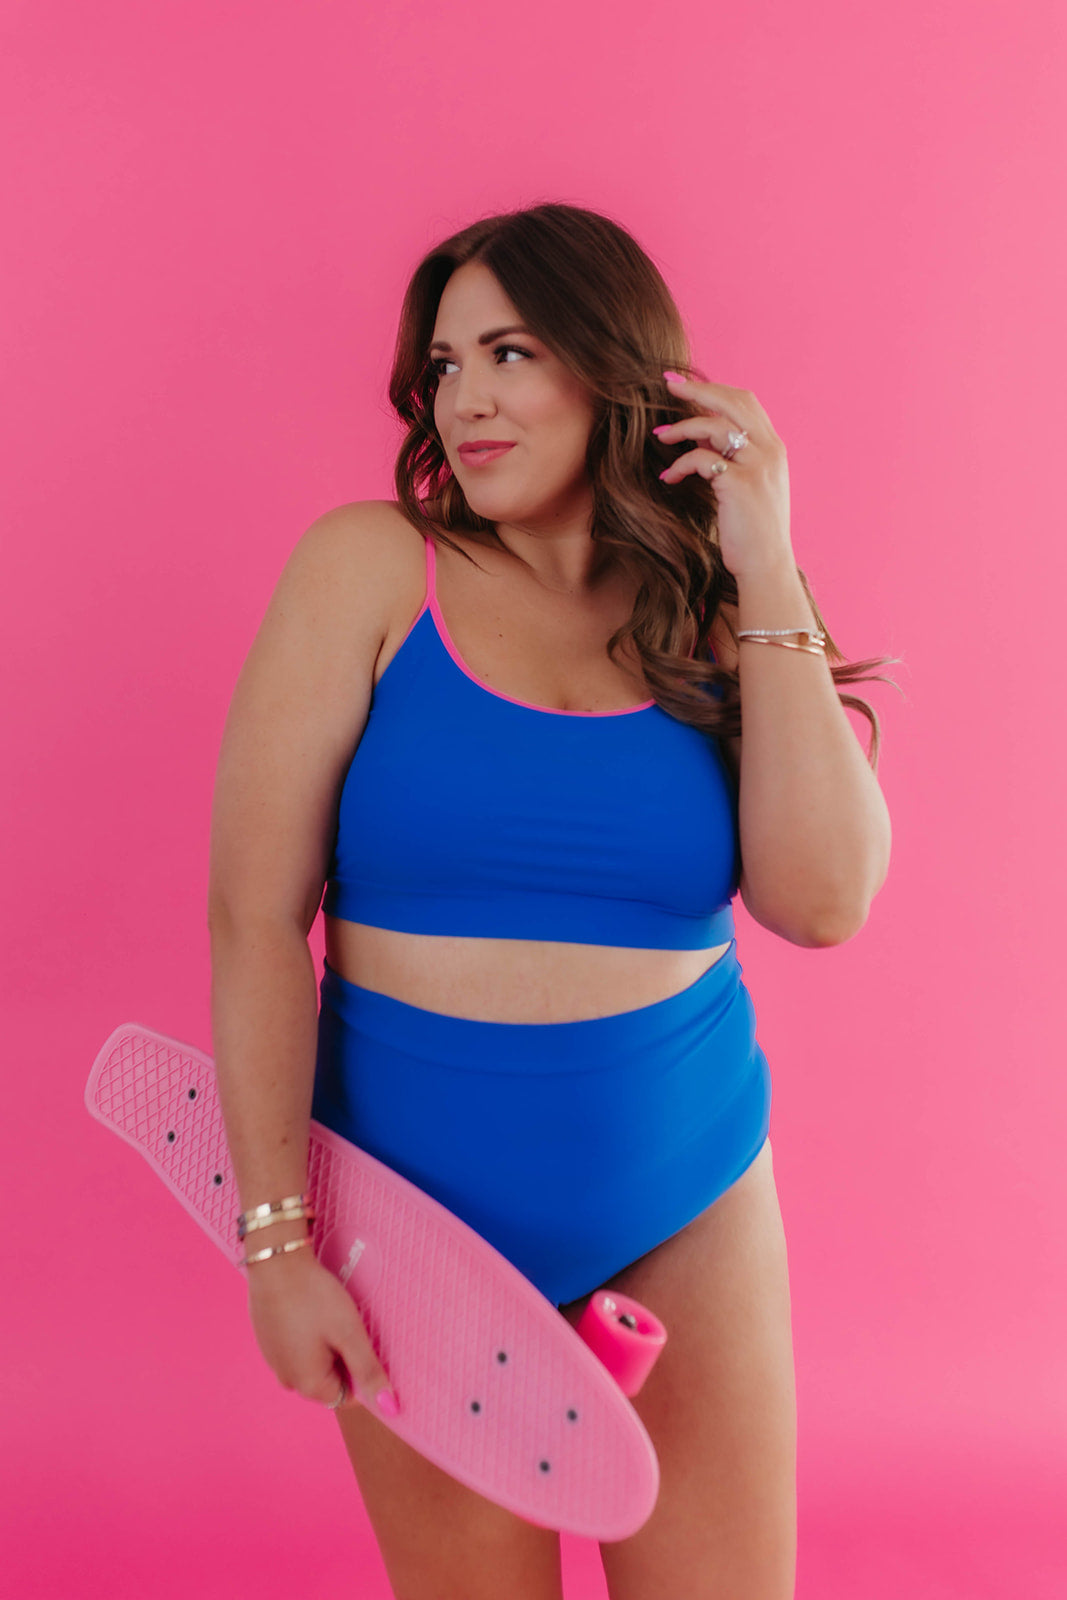 MALIBU TWO PIECE IN ROYAL BLUE AND ELECTRIC PINK TRIM BY PINK DESERT